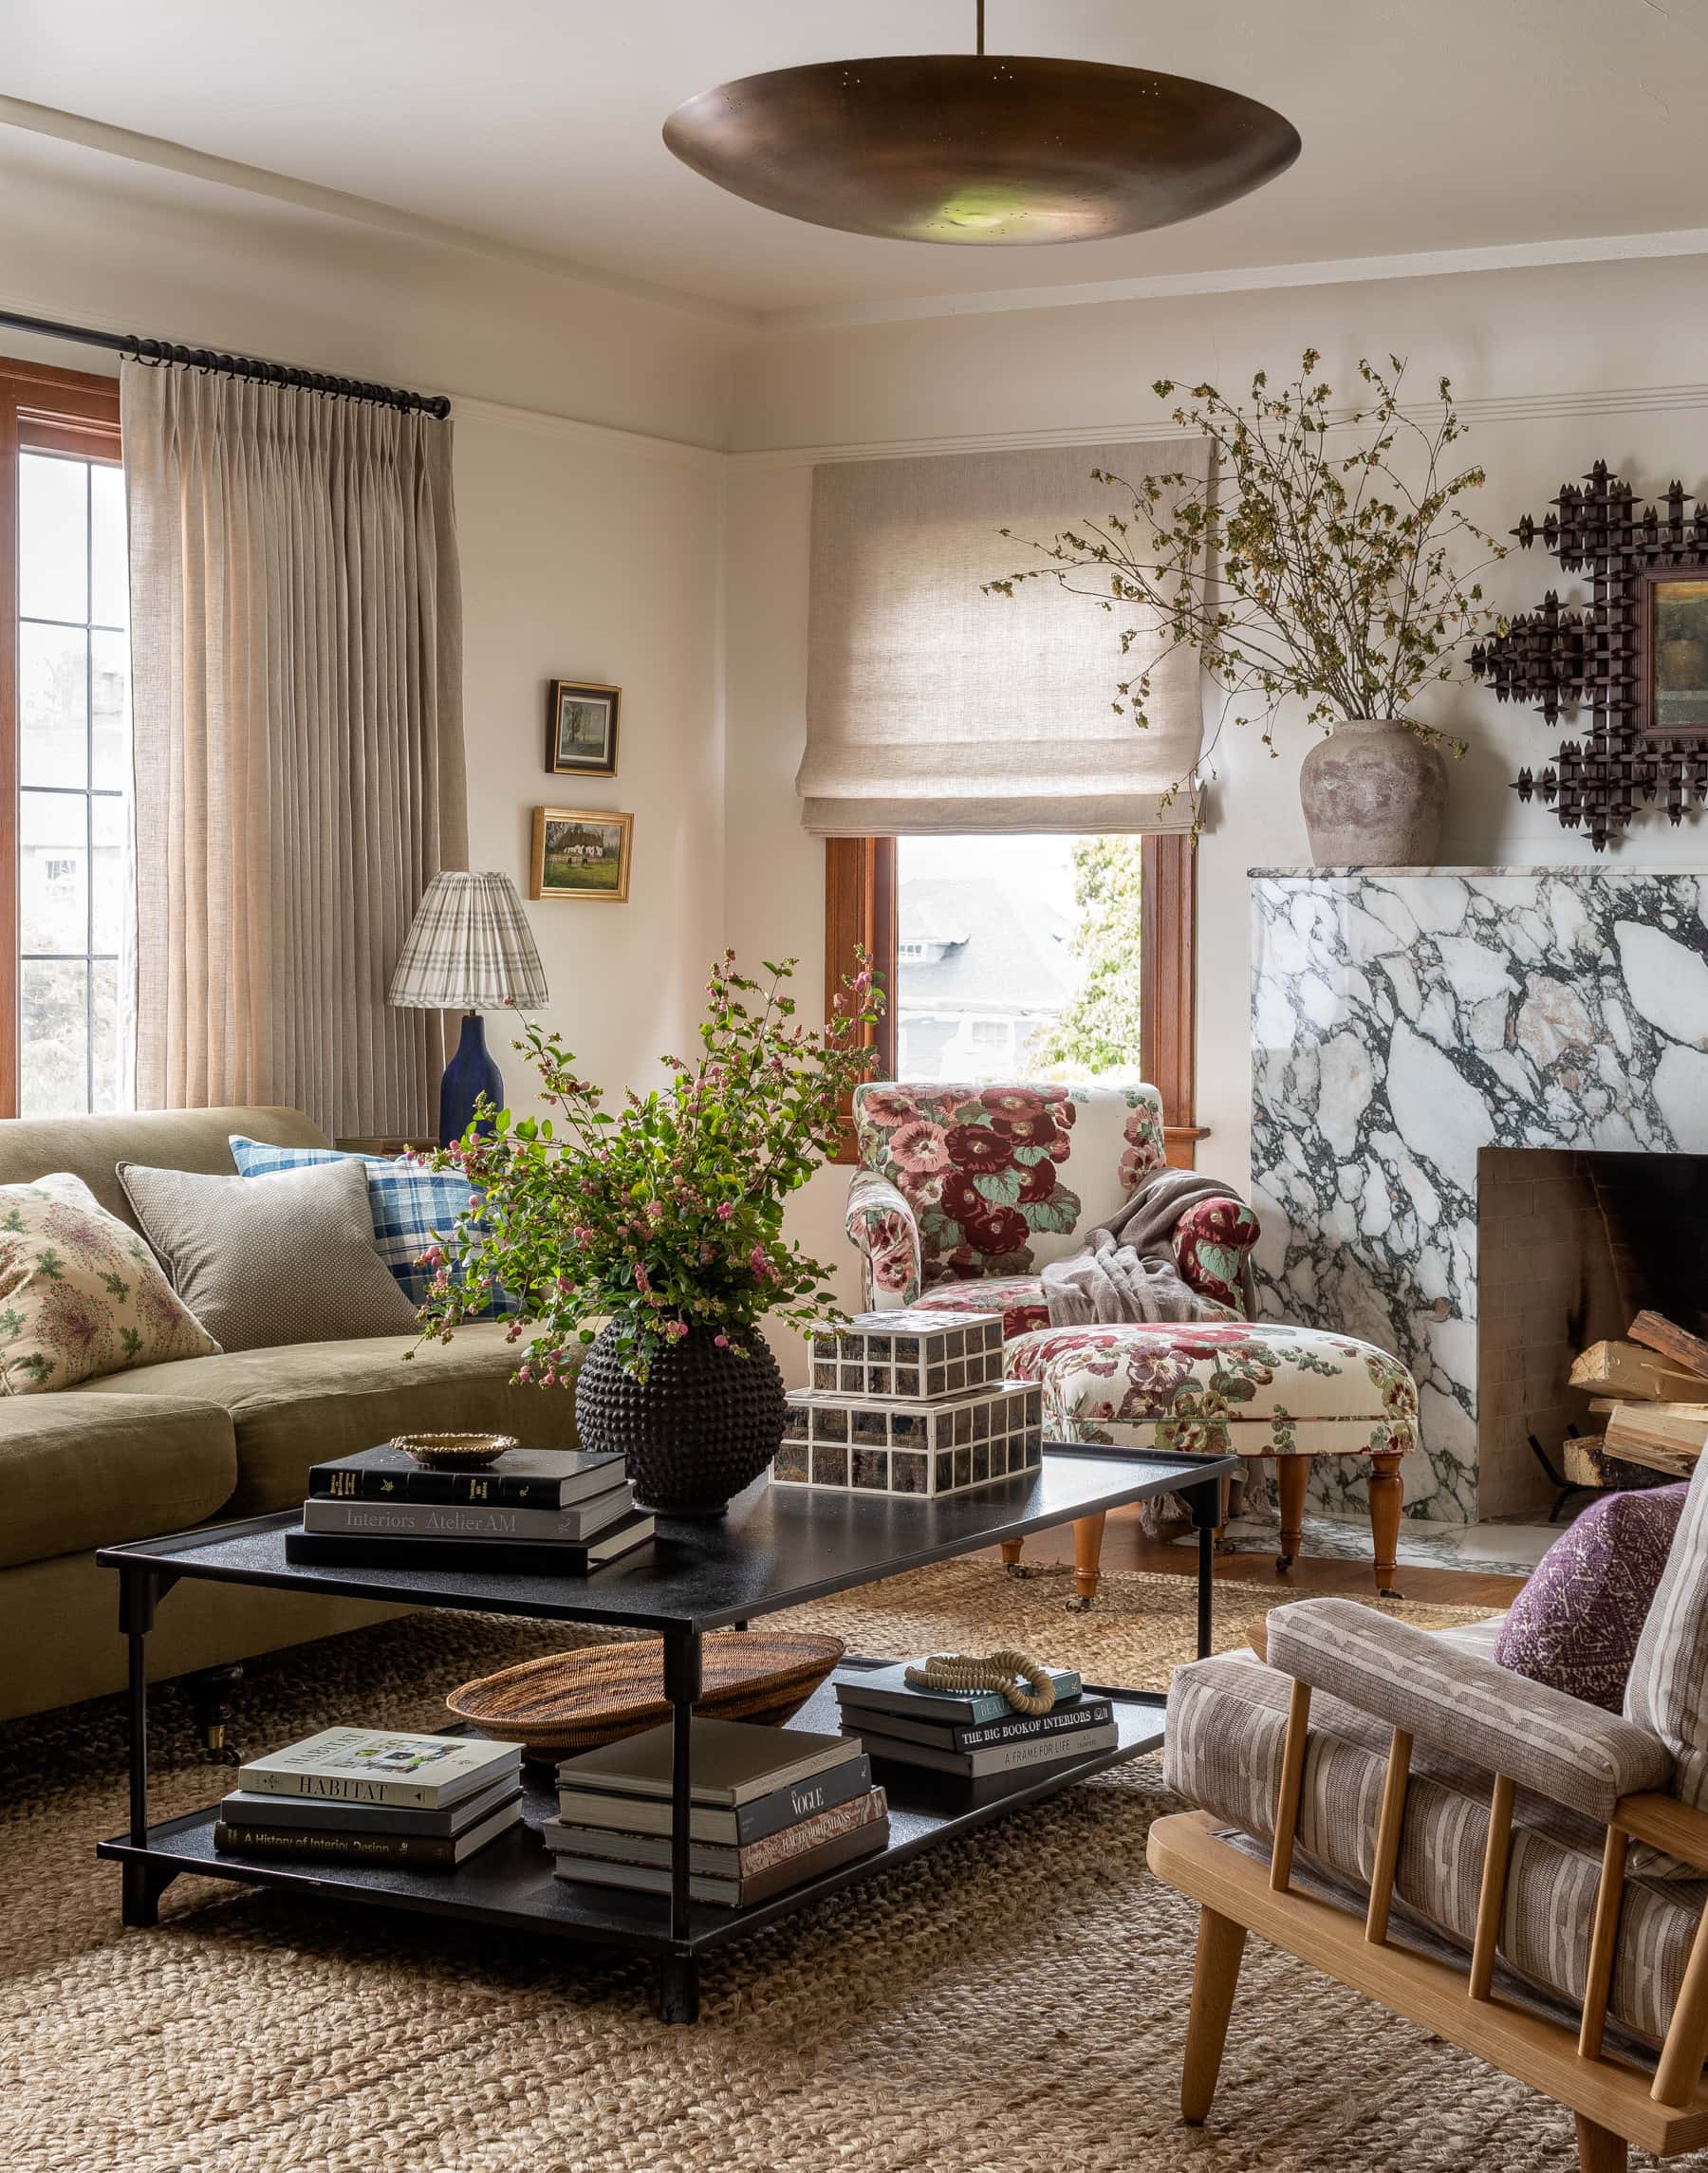 home tour featuring a living room with showcasing a living room with a vintage cottage decor